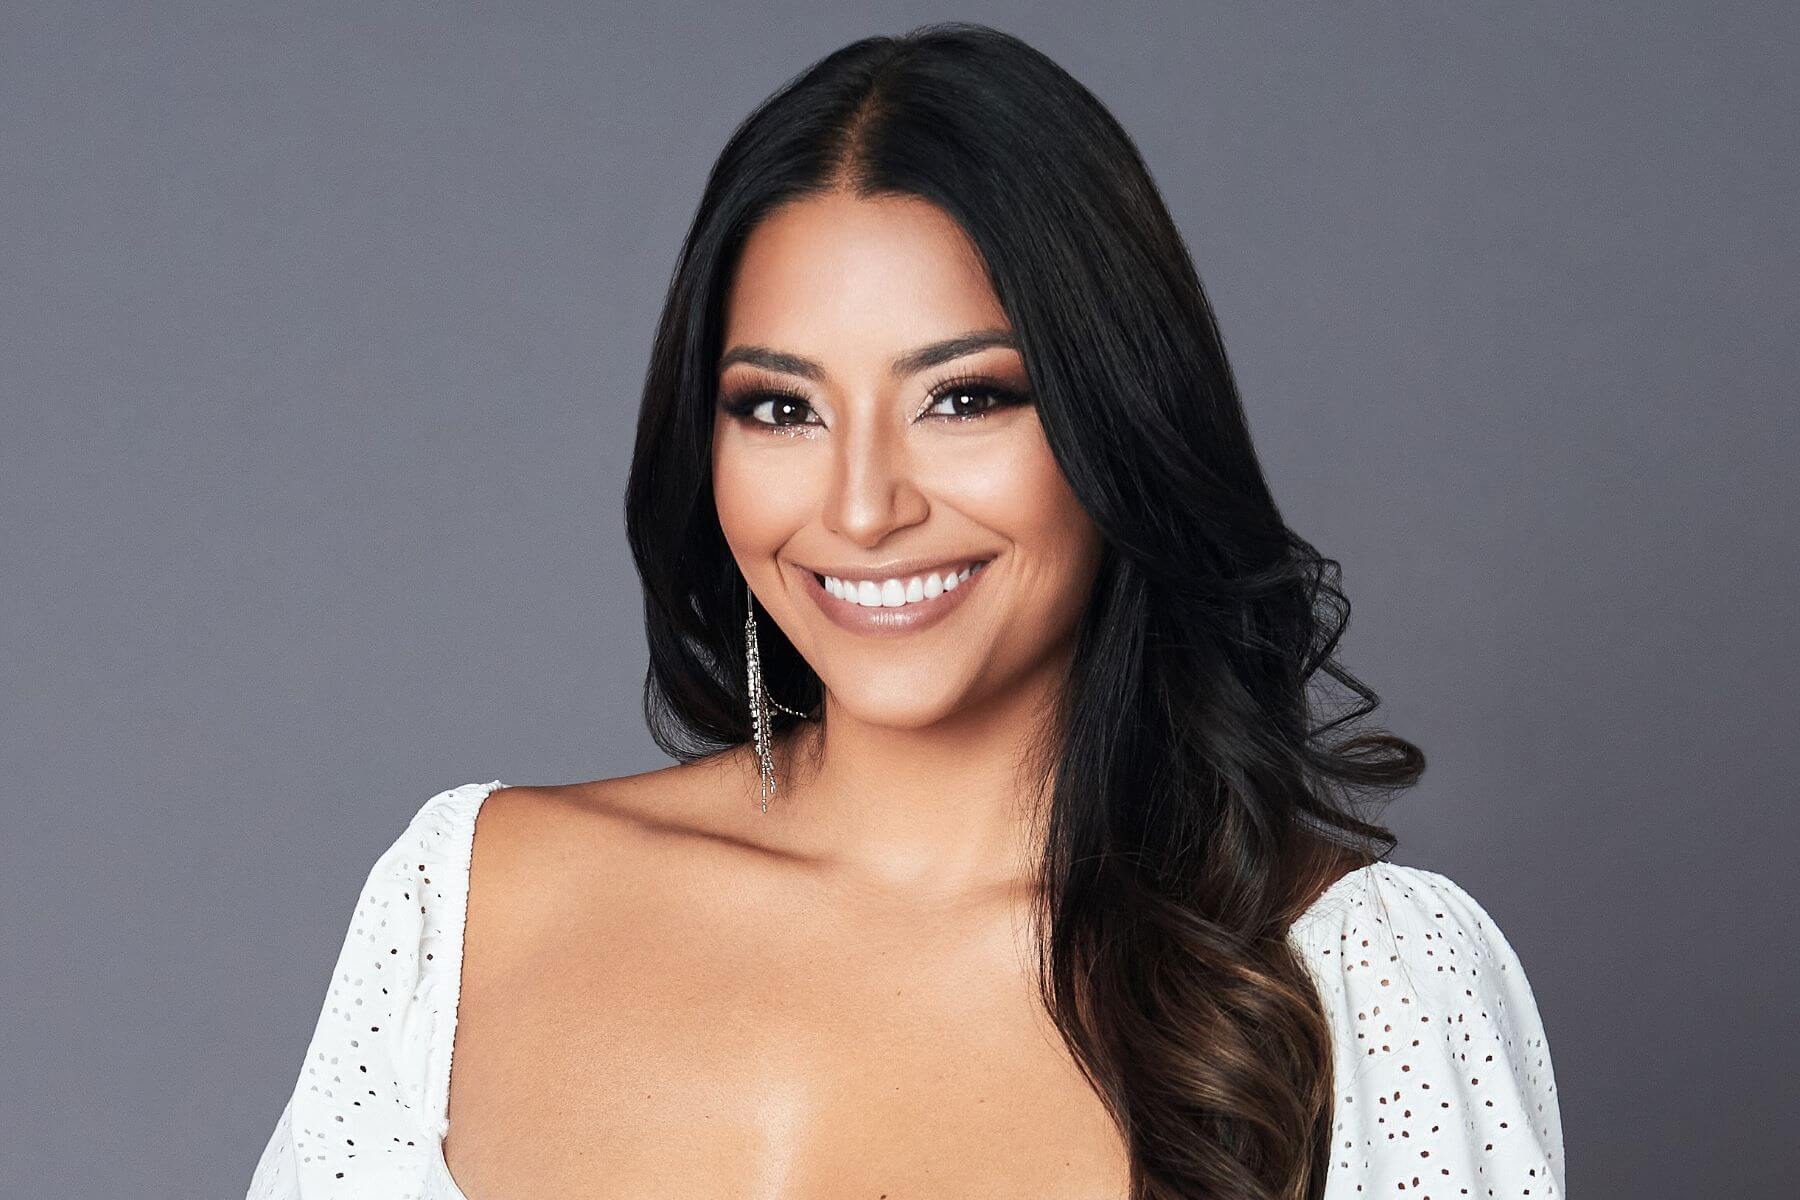 Anissa Aguilar, who is a part of the 'Are You the One?' Season 9 cast, wears a white top in her promotional photo for the show.